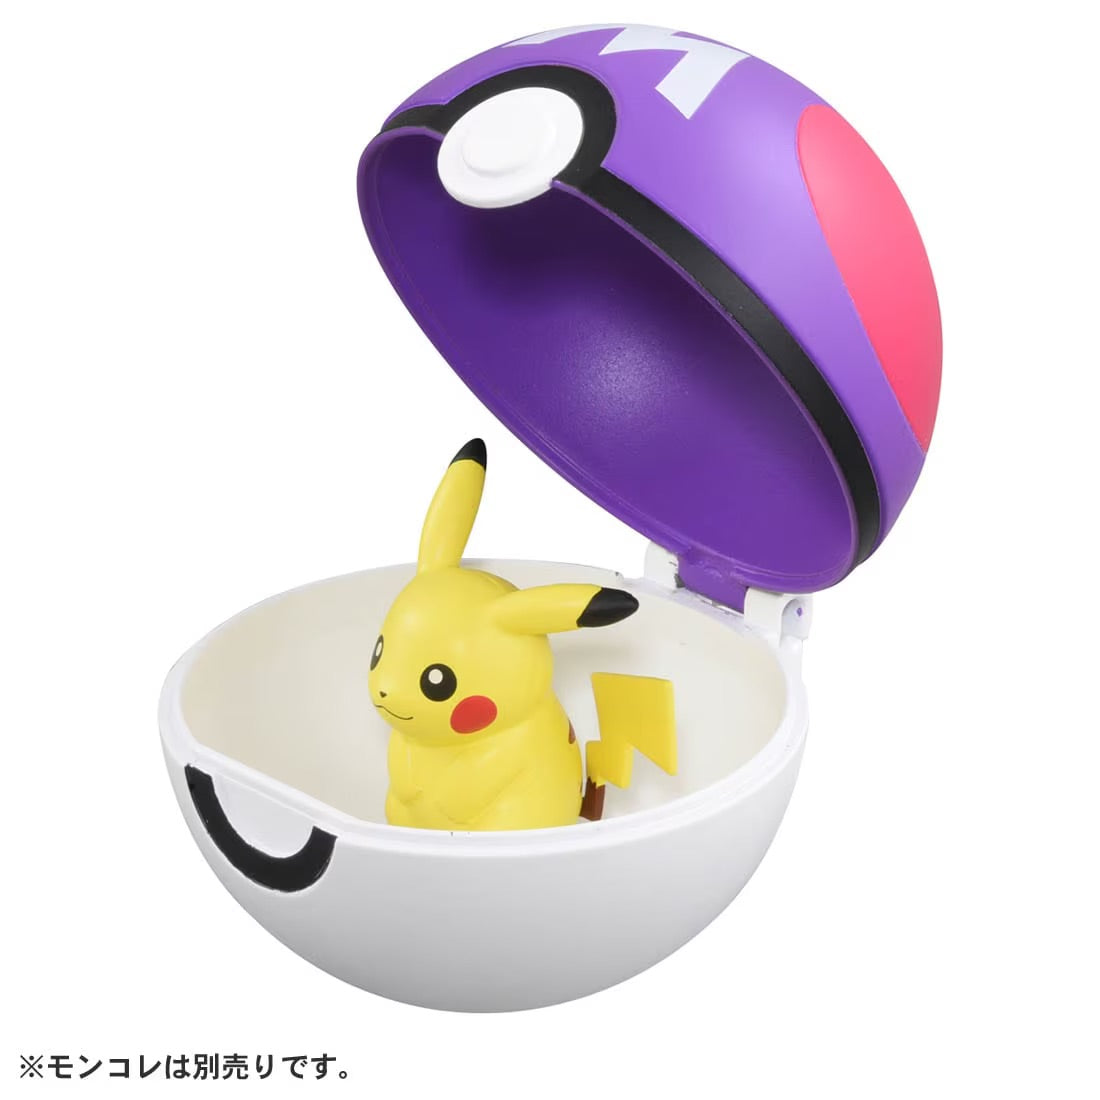 Pokemon - MB-04 Master Ball - Monster Collection (MonColle) - Takara Tomy, Franchise: Pokemon, Brand: Takara Tomy, Series: MonColle (Pokemon Monster Collection), Type: General, Release Date: 2022-08-11, Dimensions: Ø7 cm // Ø2.75 inches, Nippon Figures